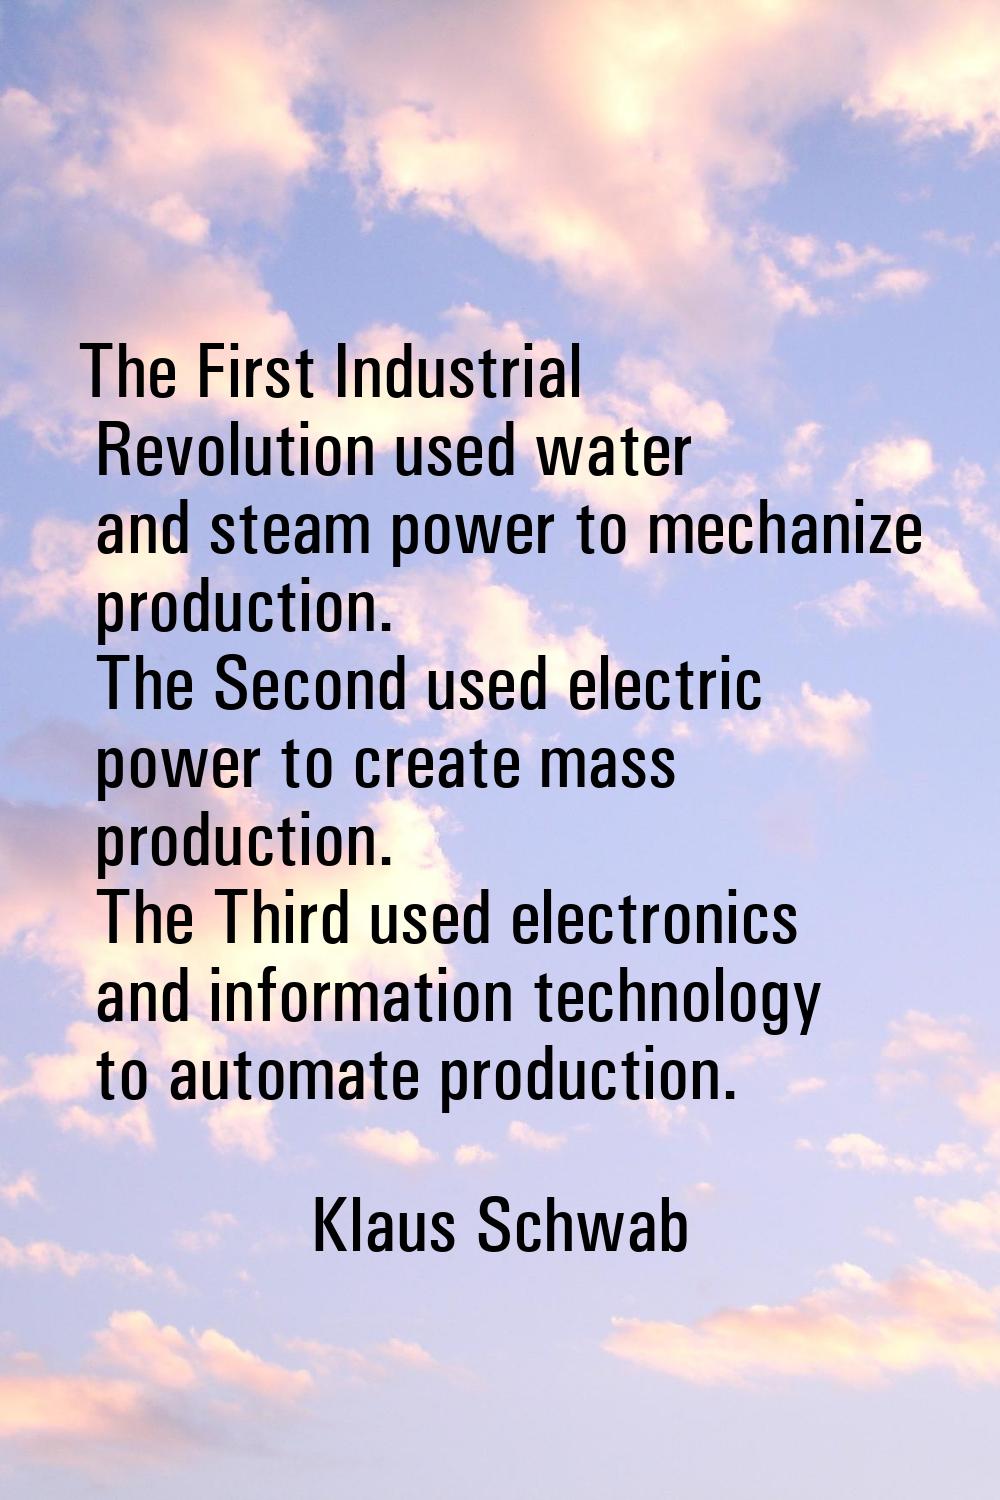 The First Industrial Revolution used water and steam power to mechanize production. The Second used